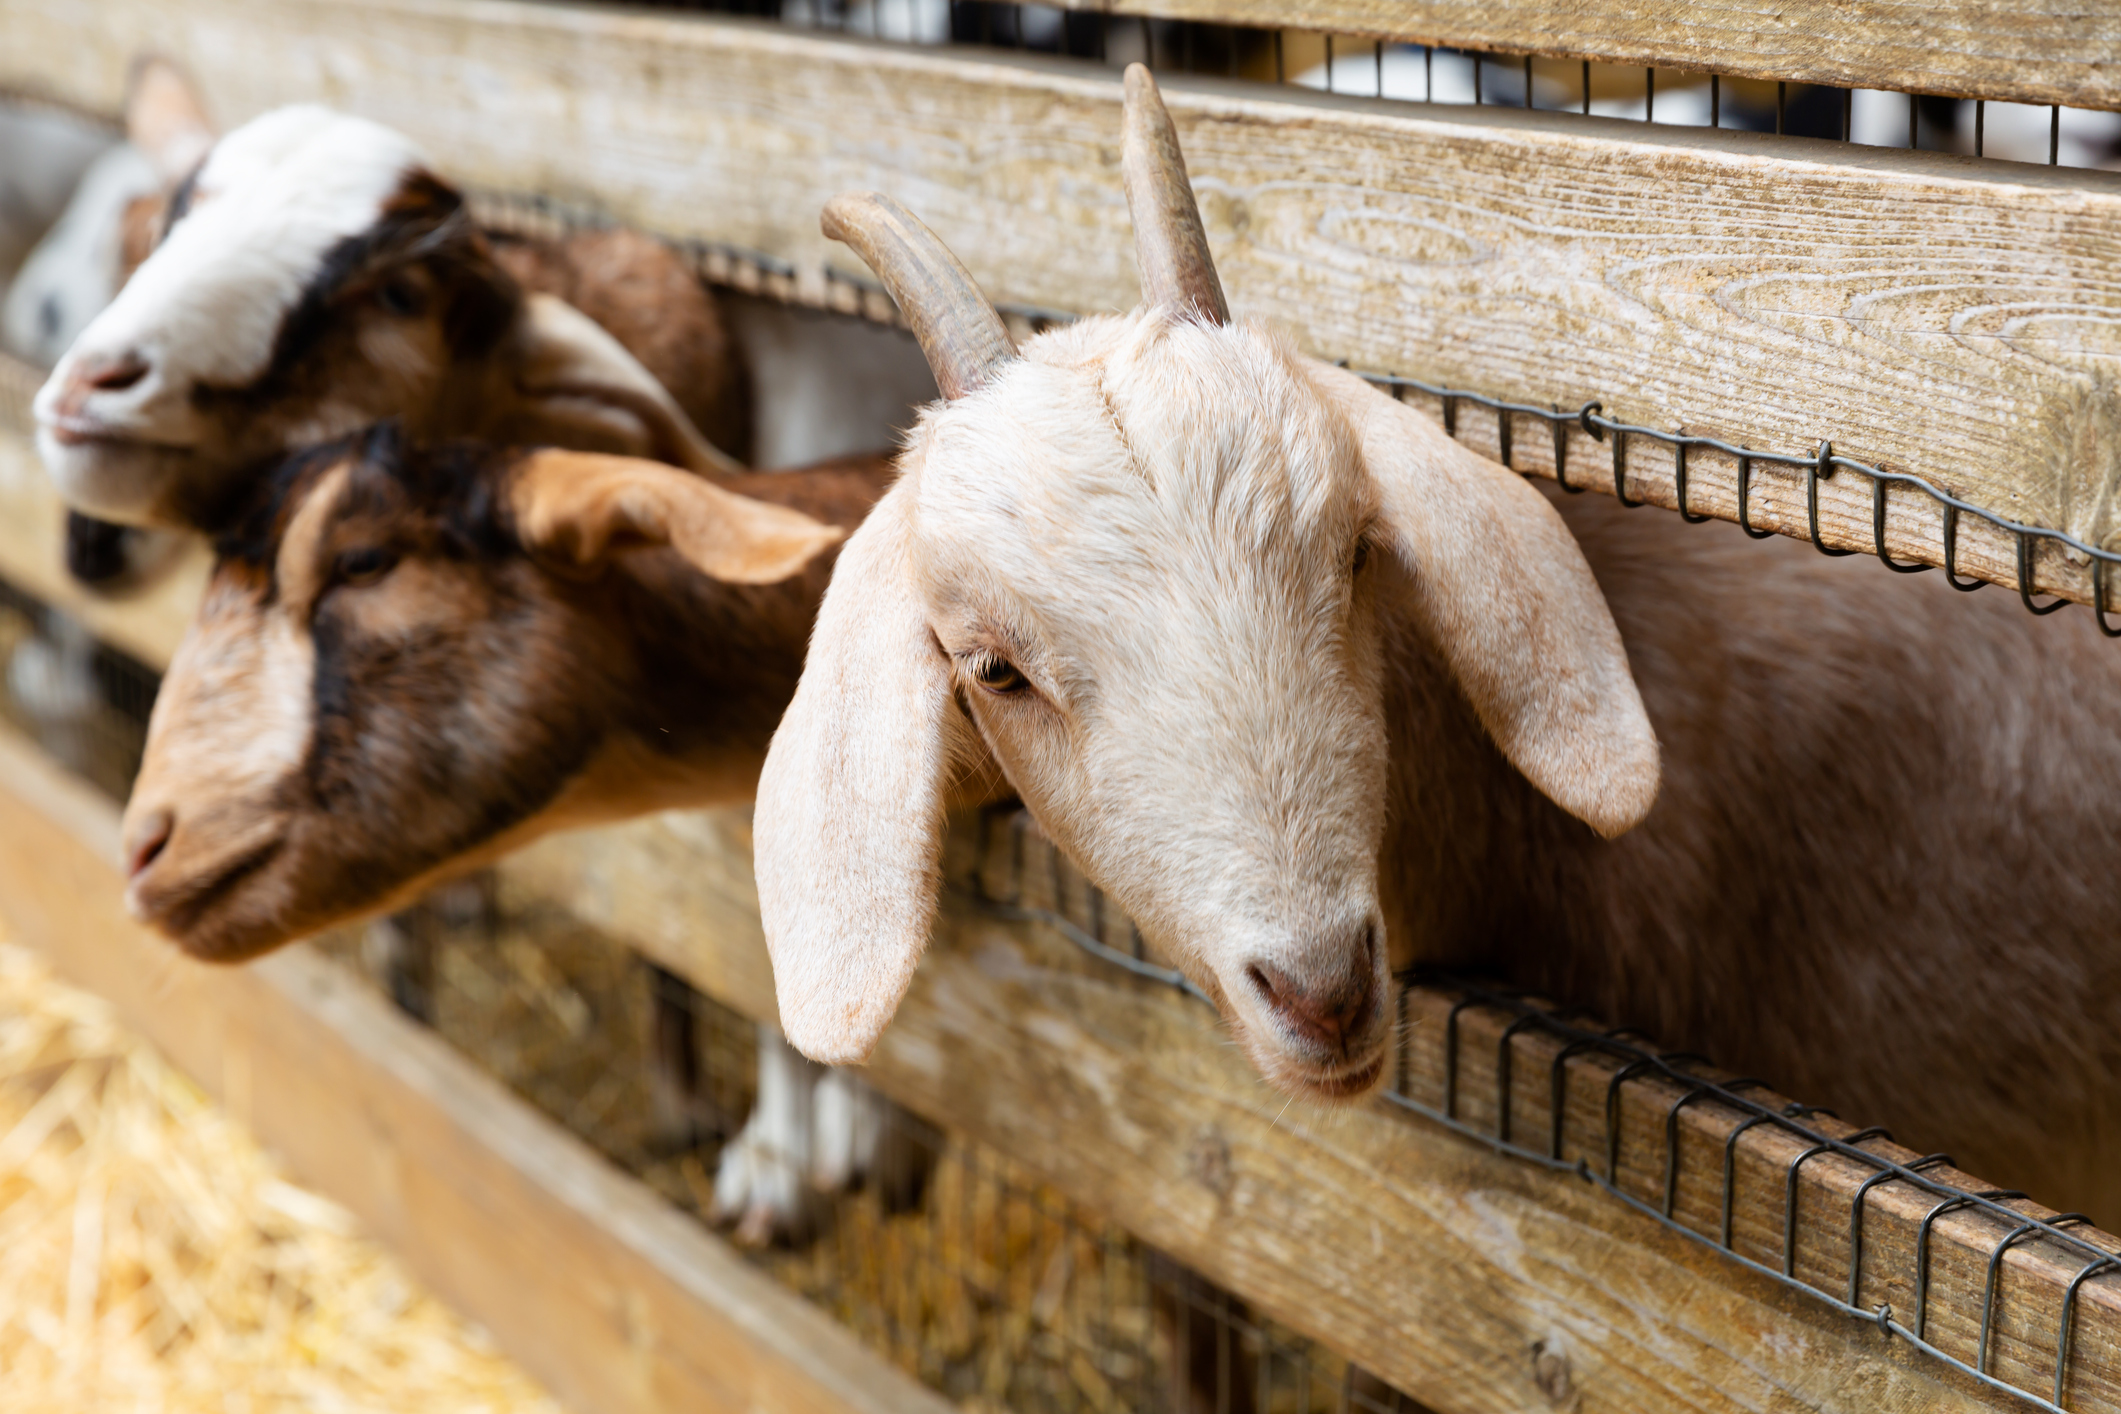 Ontario dairy farm offering $2,500 reward for missing goats